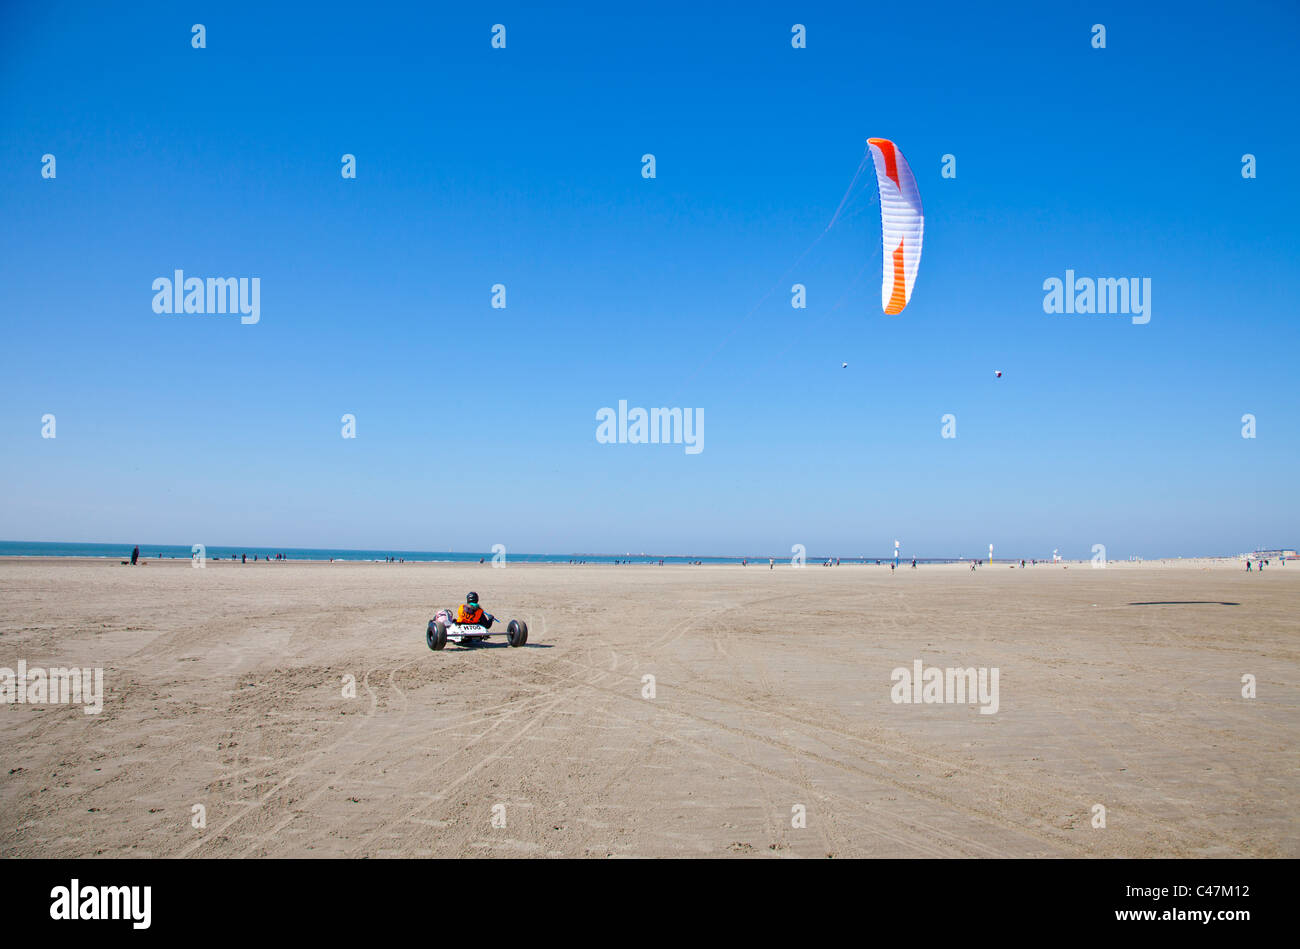 Buggy with kite at beach Stock Photo